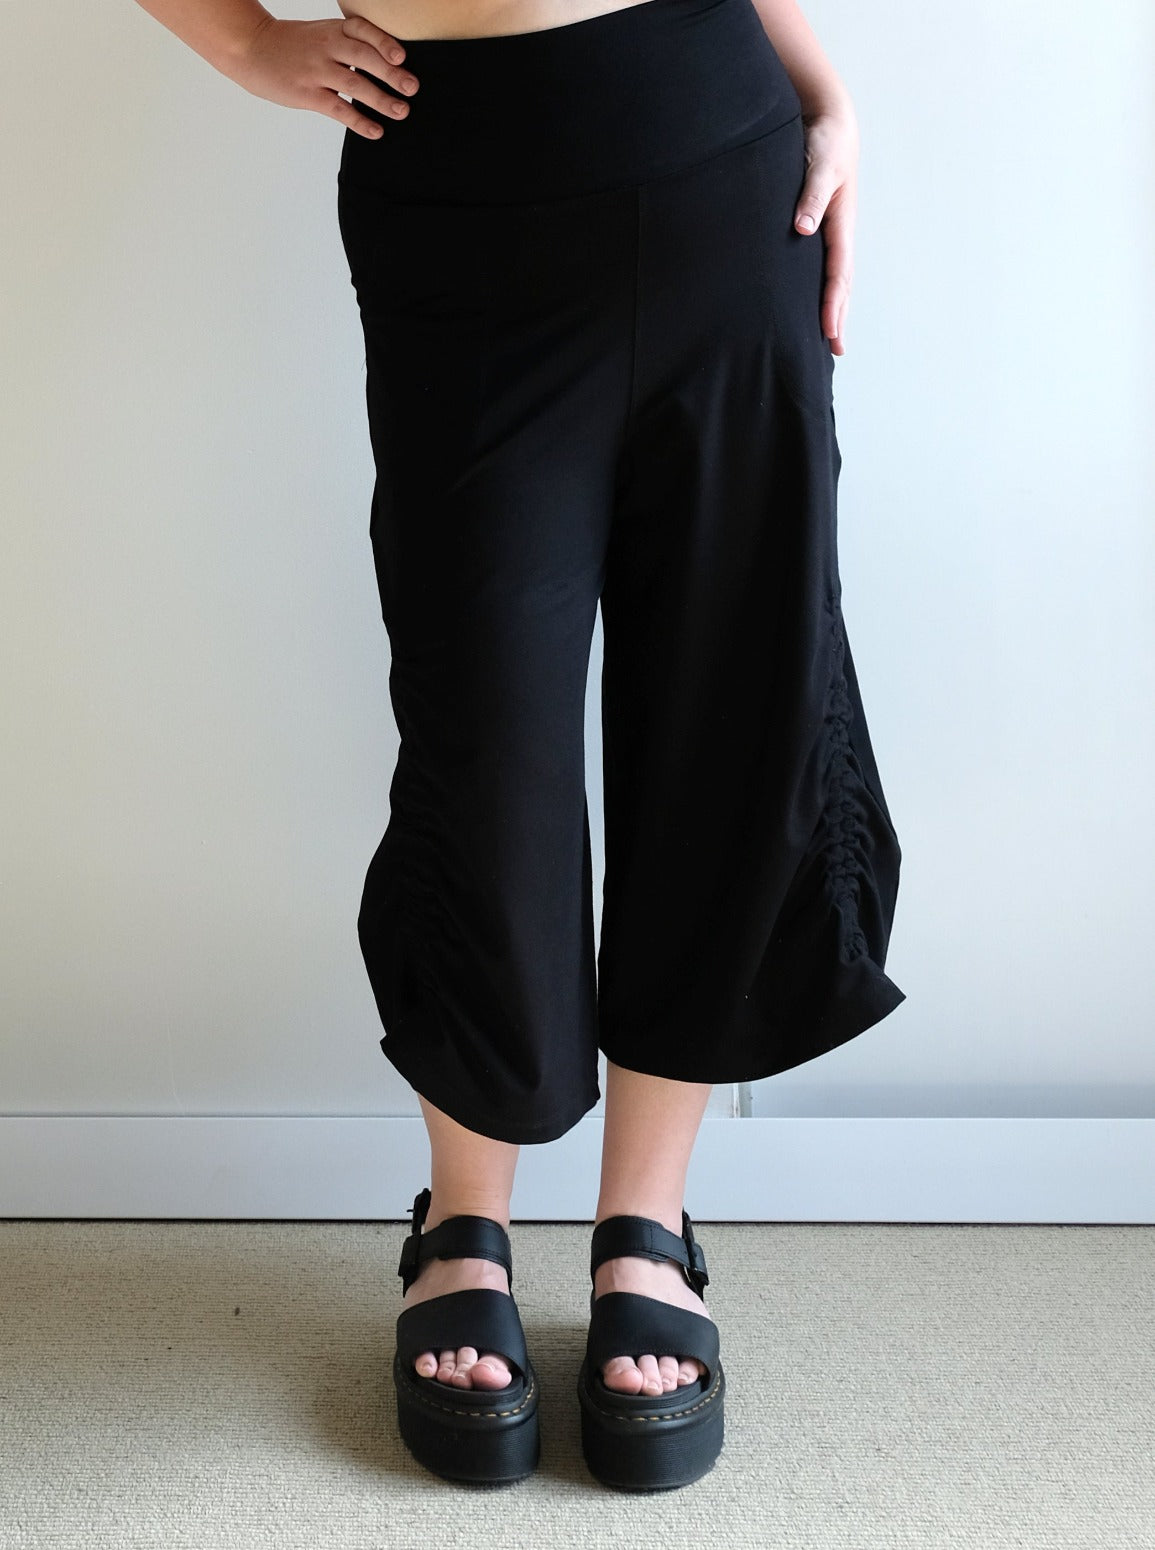 Women's High-waist Yoga Wide Leg Pants With Pockets, Curved Cut-out Hem And  Side Slit, Sporty And Casual Loose Fit Capri Pants